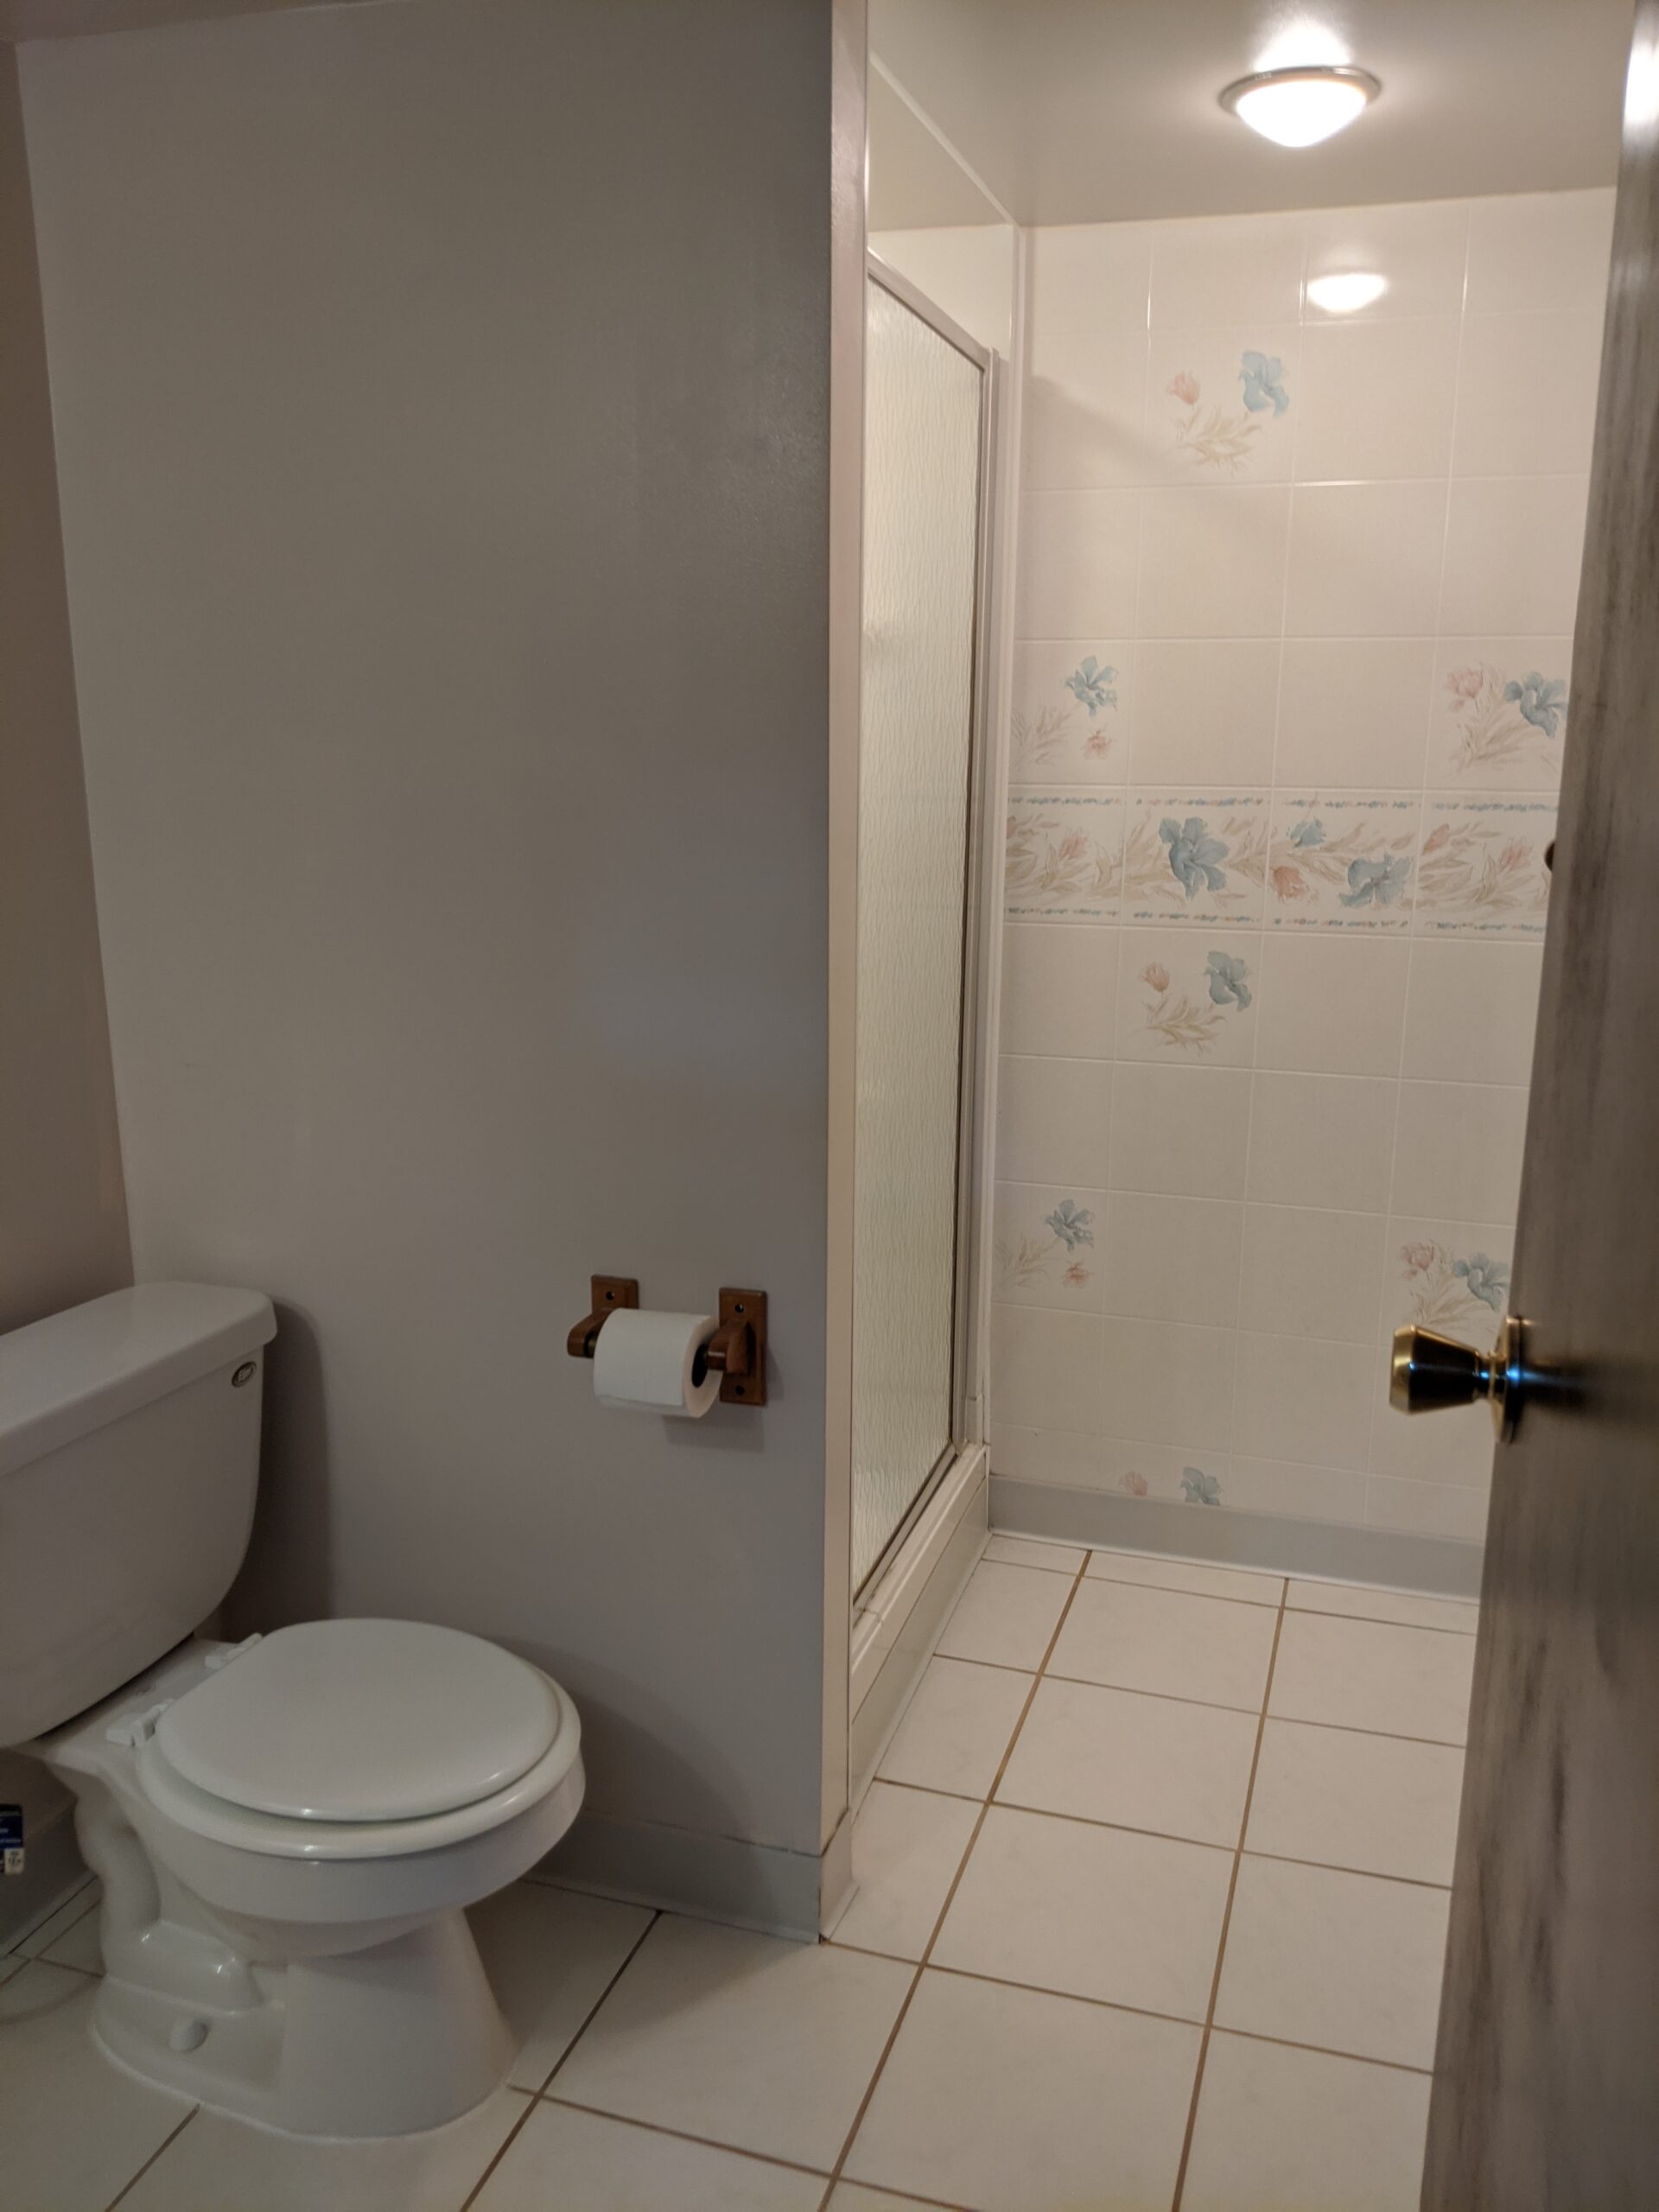 How long should it take to update a bathroom?